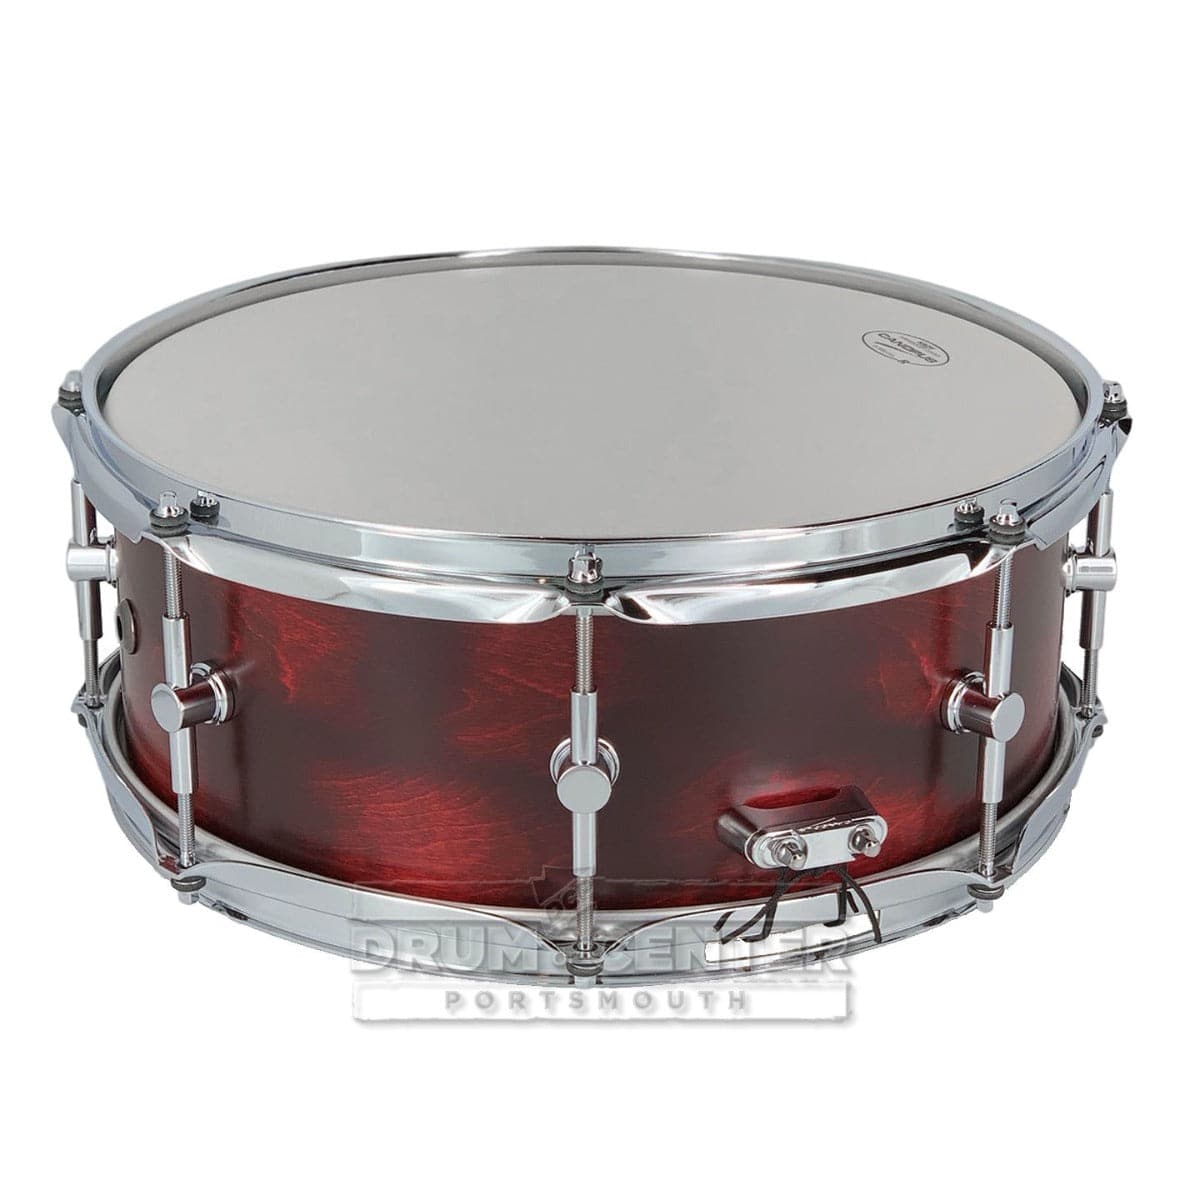 Canopus Birch Snare Drum Red Matte Lacquer 2ND LINE 14x5.5